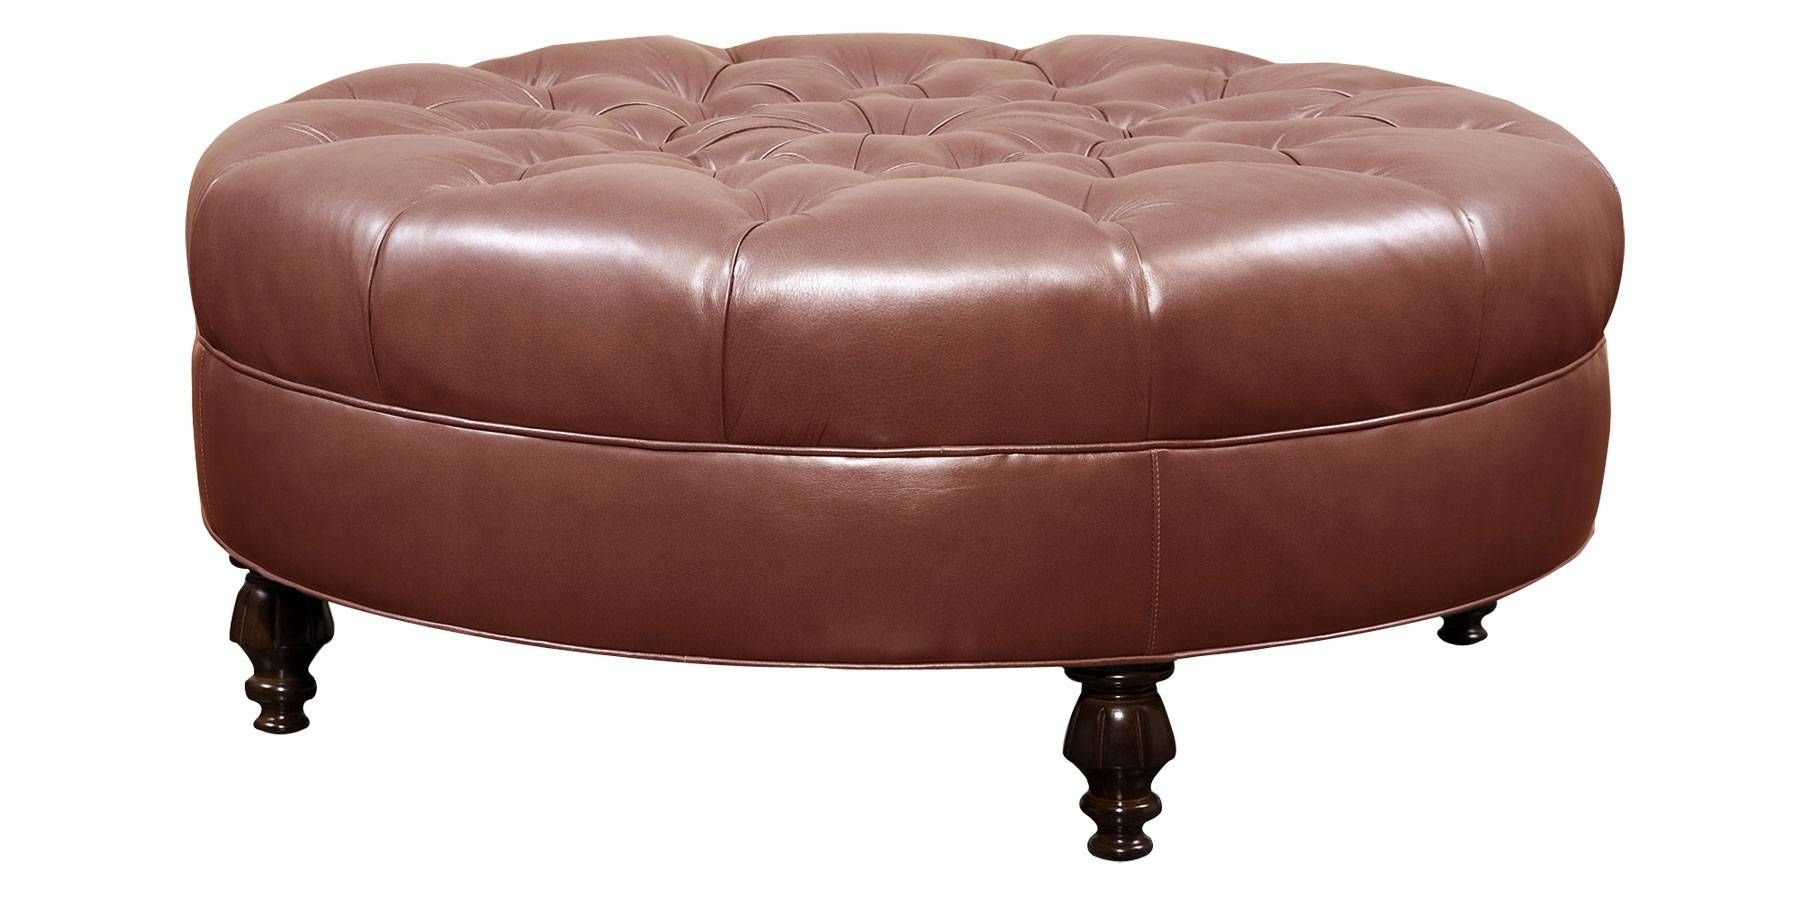 Red Round Leather Ottoman Coffee Table | Coffee Tables Decoration For Brown Leather Ottoman Coffee Tables (View 23 of 30)